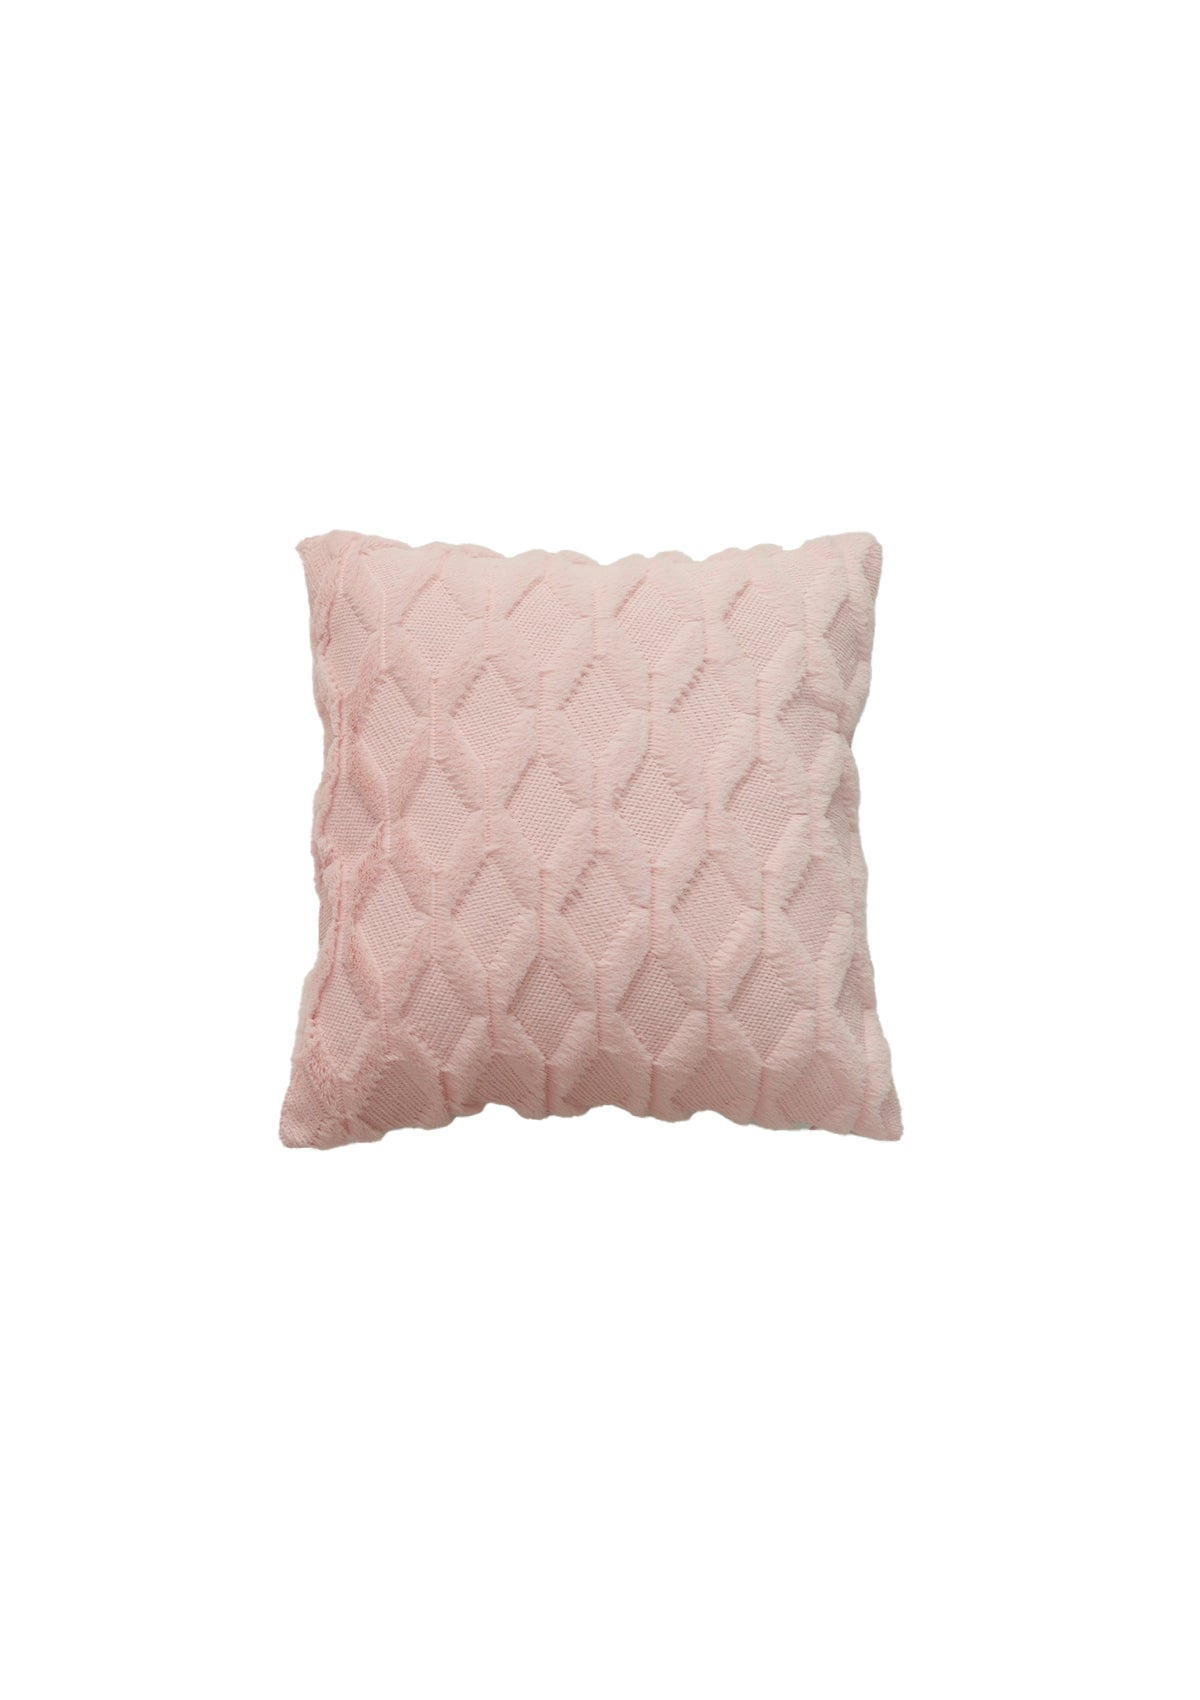 Pink Fluffy Cushion Cover | CovermyCushion